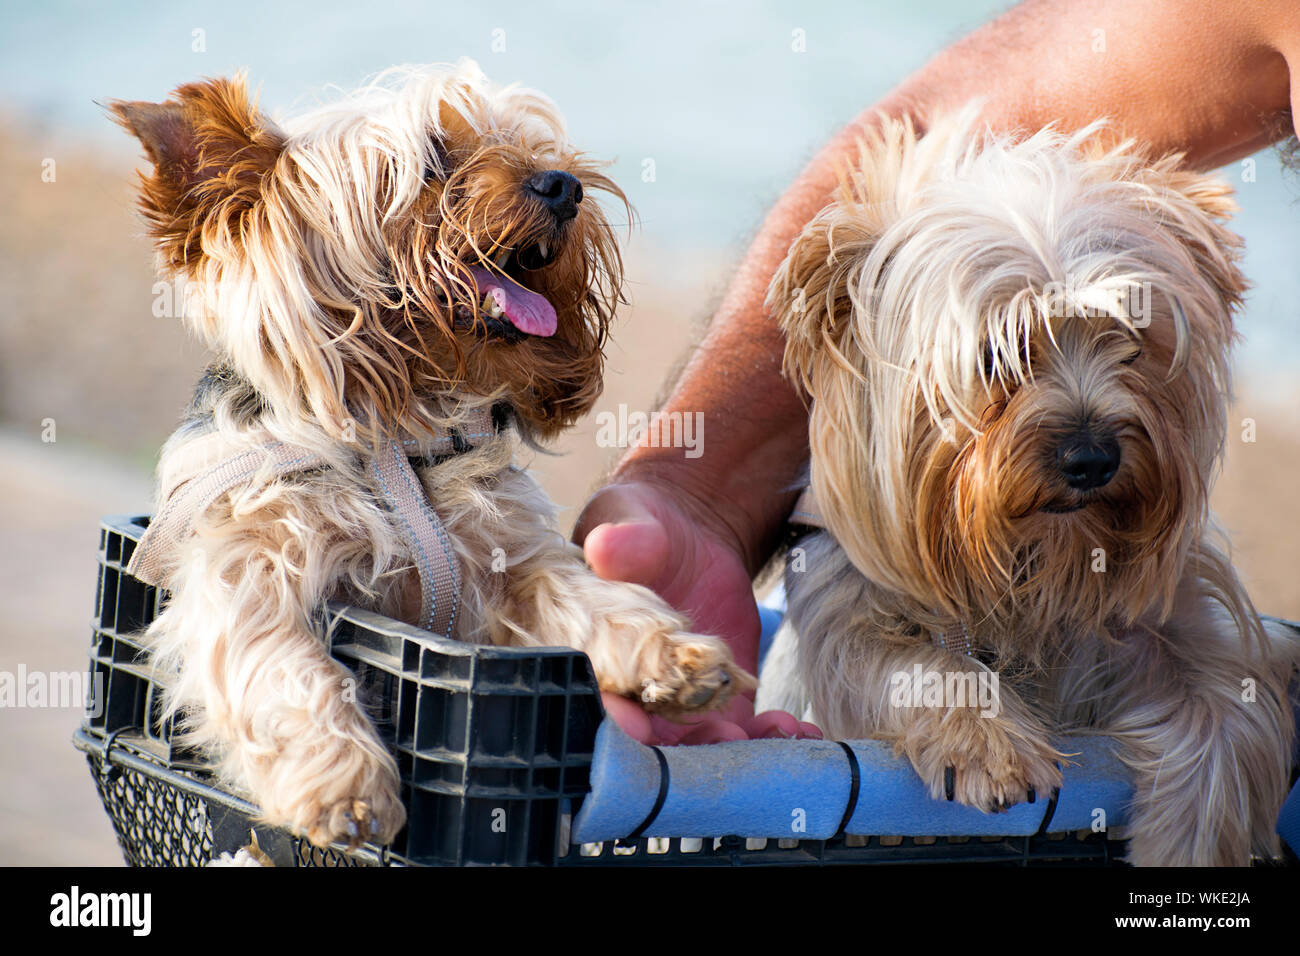 Two cute Yorkshire or Yorkie terrier dogs in basket. Transporting two sweet york shire terrier dogs. Cute canine yorkshir inside a basket. Spain, 2019. Stock Photo